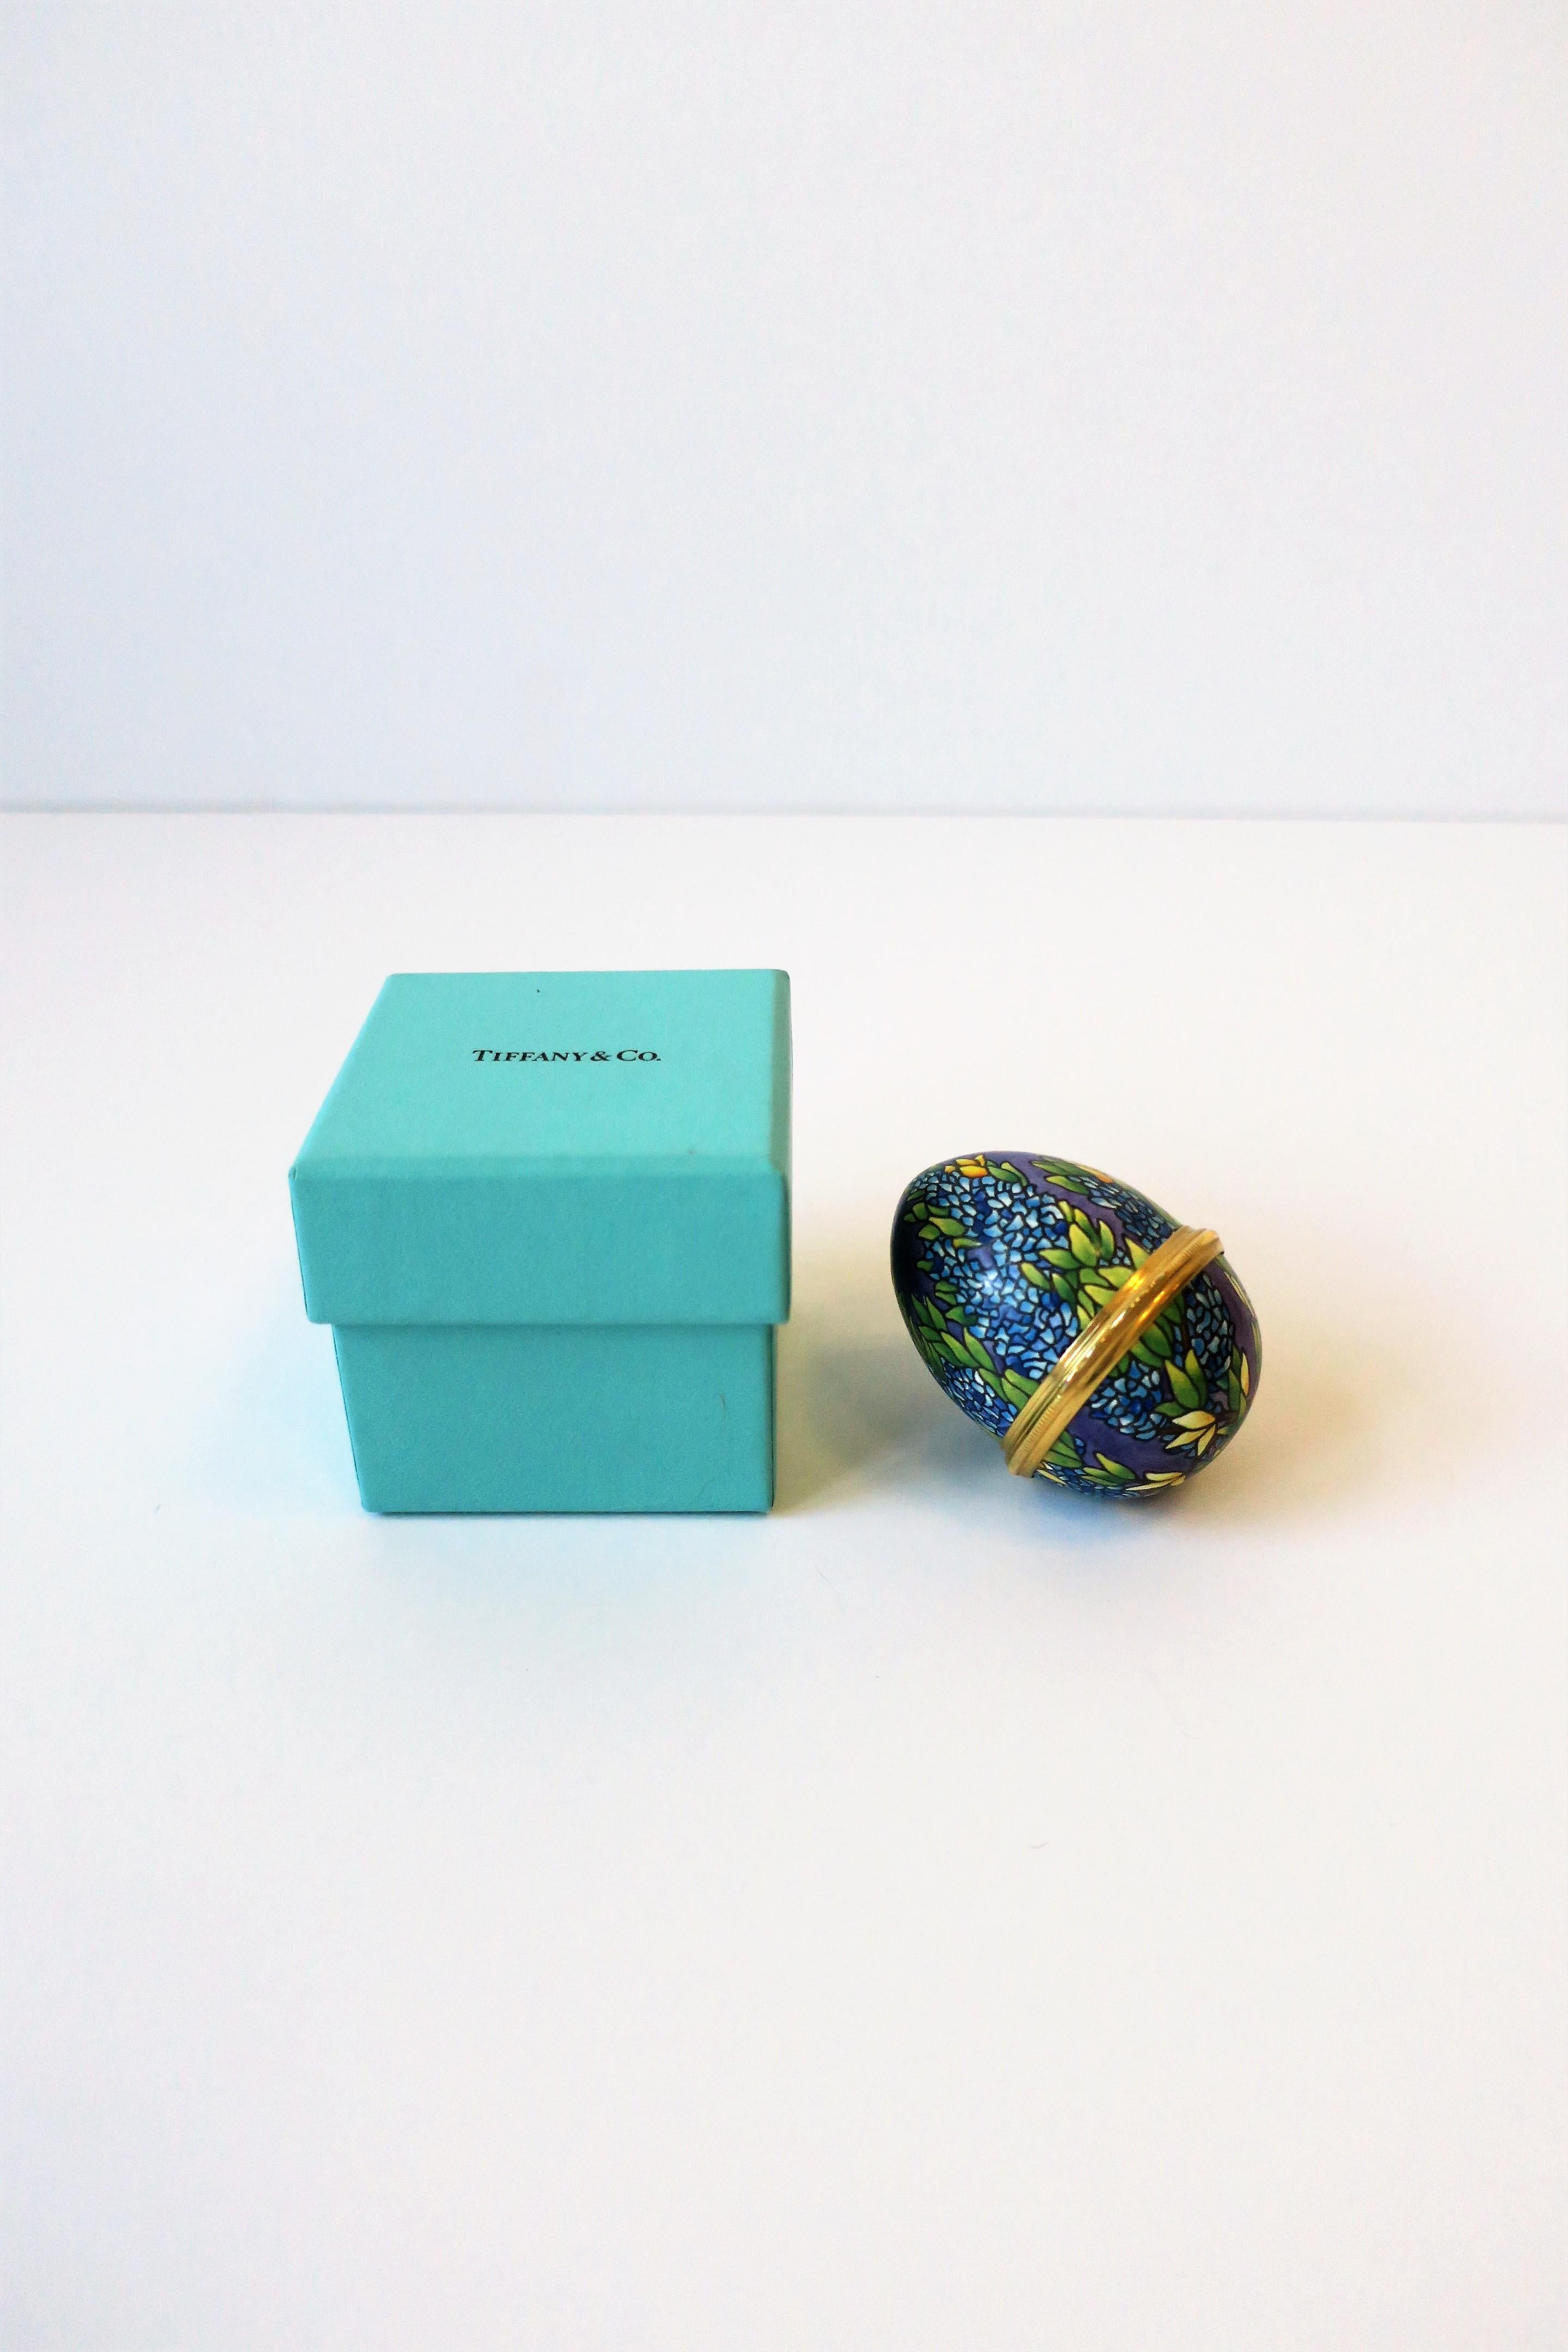 From luxury jewelry retailer Tiffany & Co., a beautiful colorful enamel 'Easter' egg box, circa 20th century. Tiffany & Co. egg box has a beautiful floral exterior supported by a gold-tone hinge; inside is marked 'Tiffany & Co.' as show in images #9